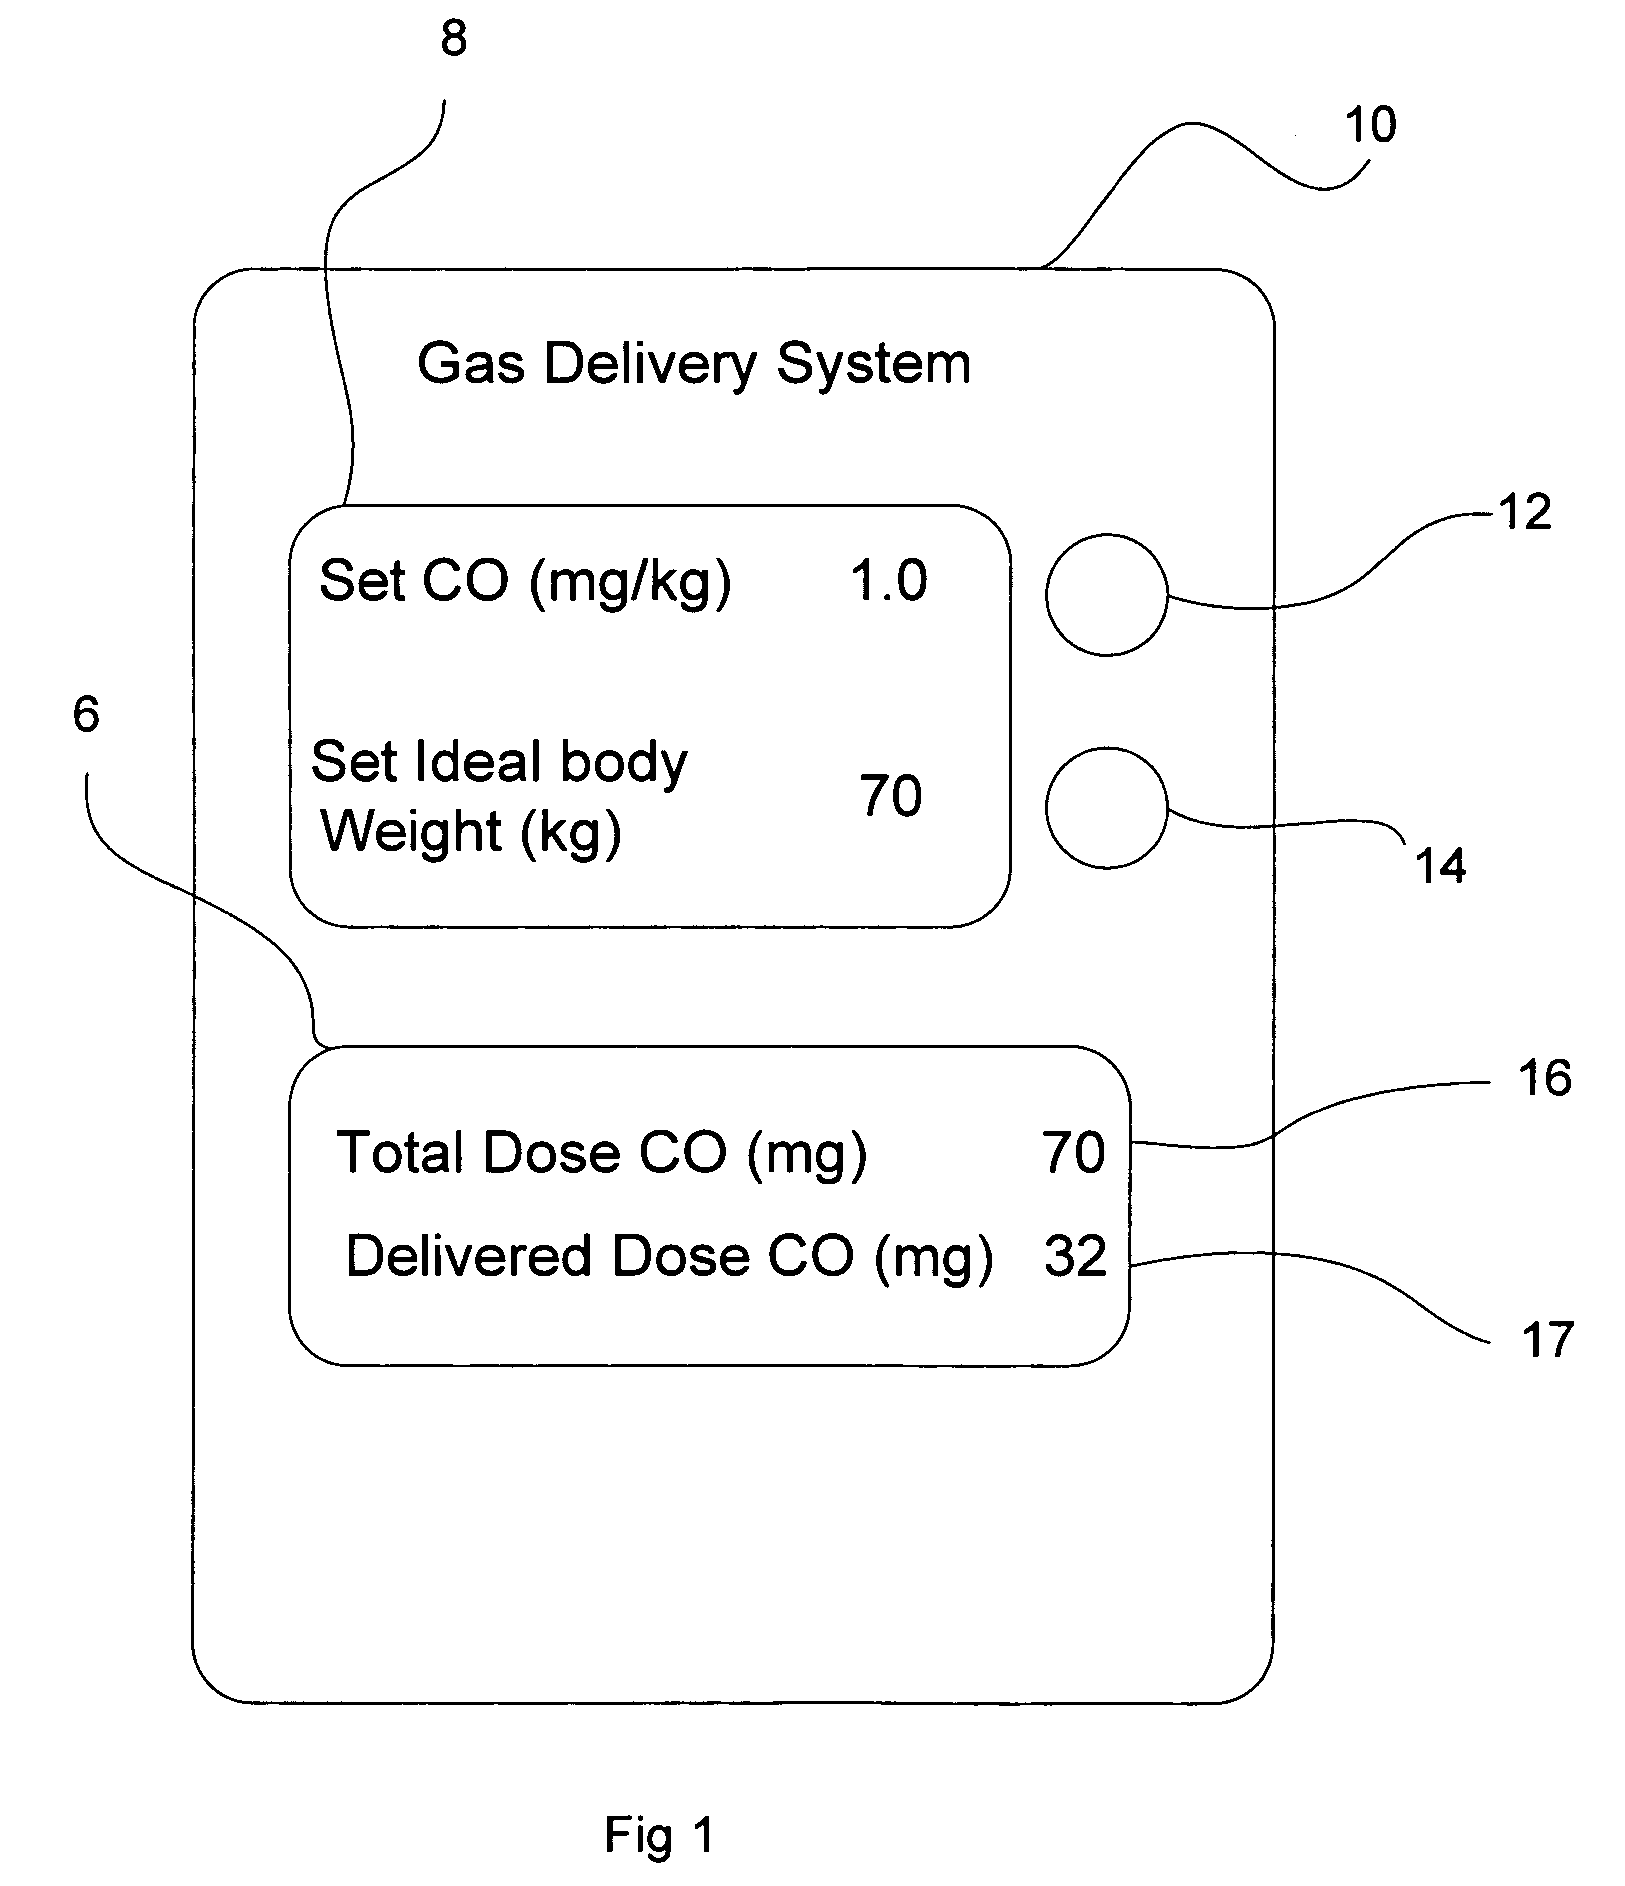 System and method of administering a pharmaceutical gas to a patient